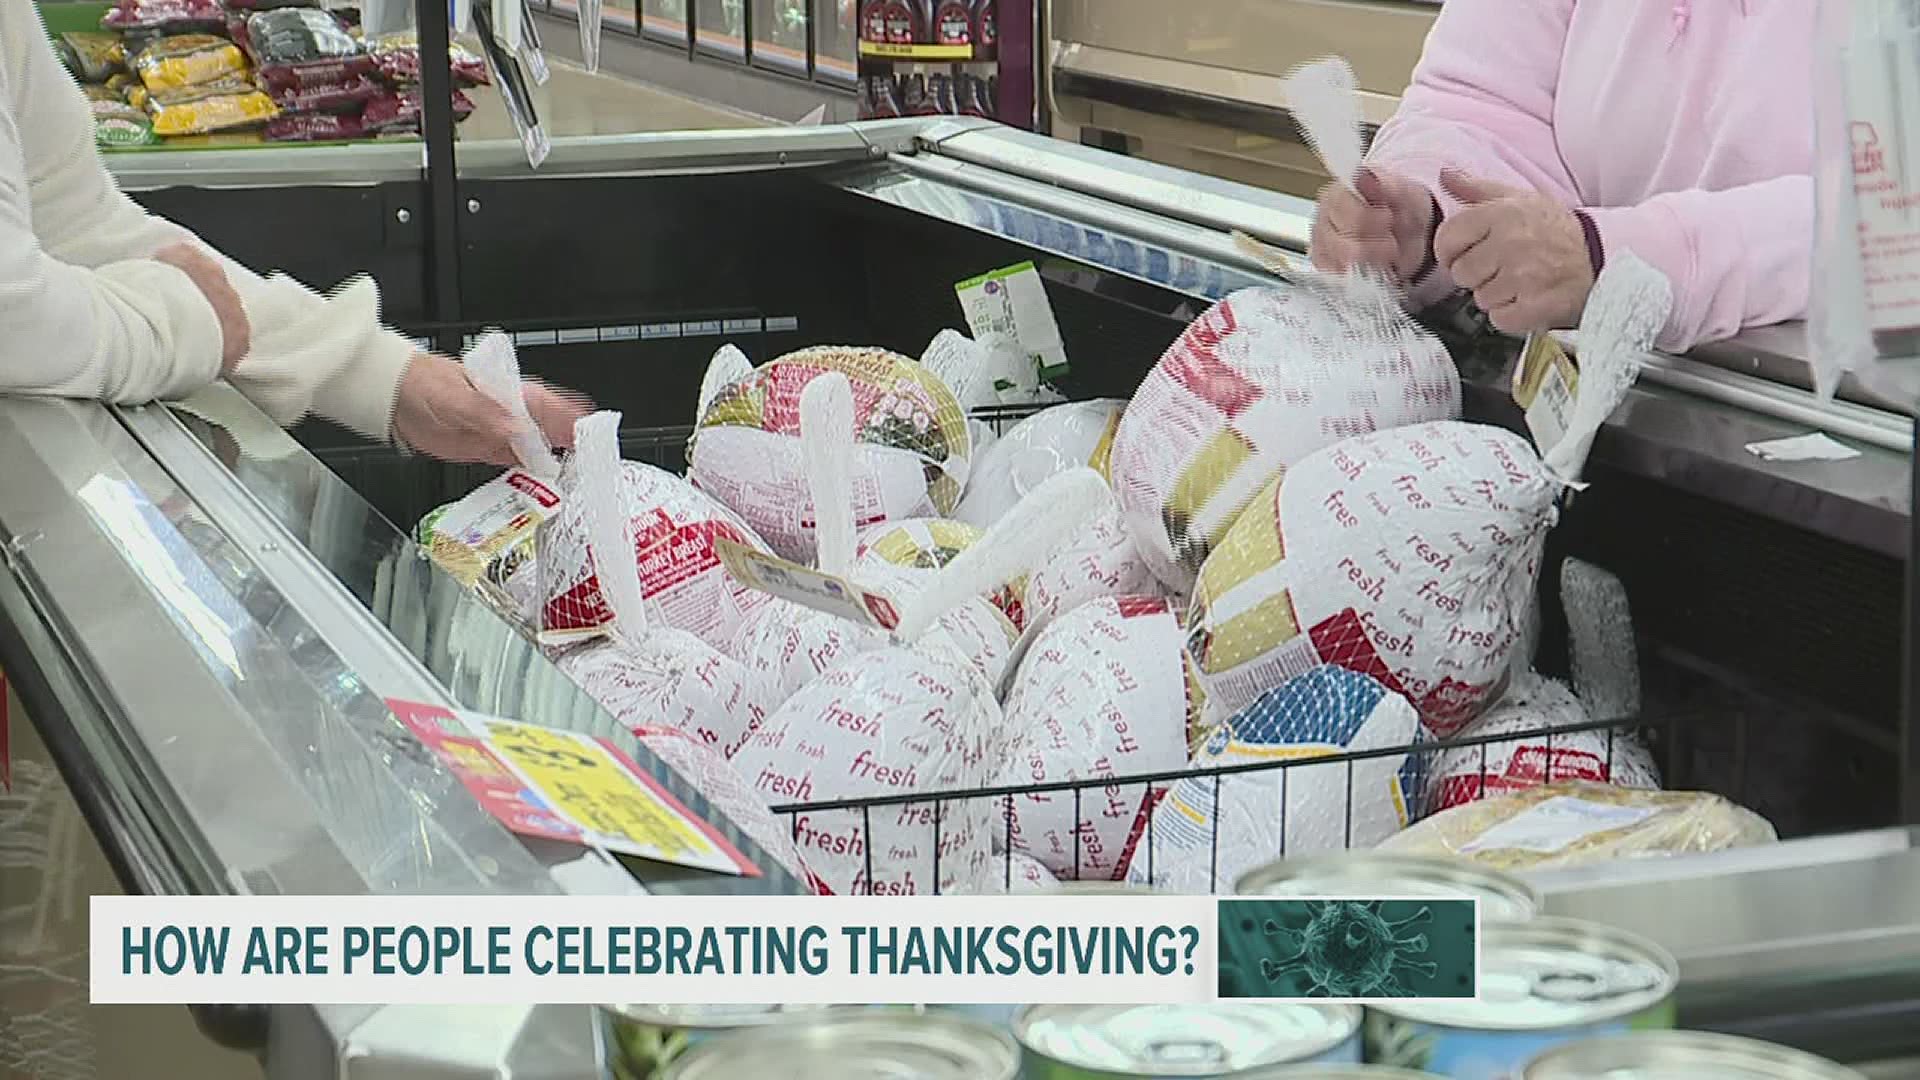 FOX43 went to Karns Foods to see if people have changed course due to COVID-19. Turns out, many are having smaller feasts. For some, it will be just their household.